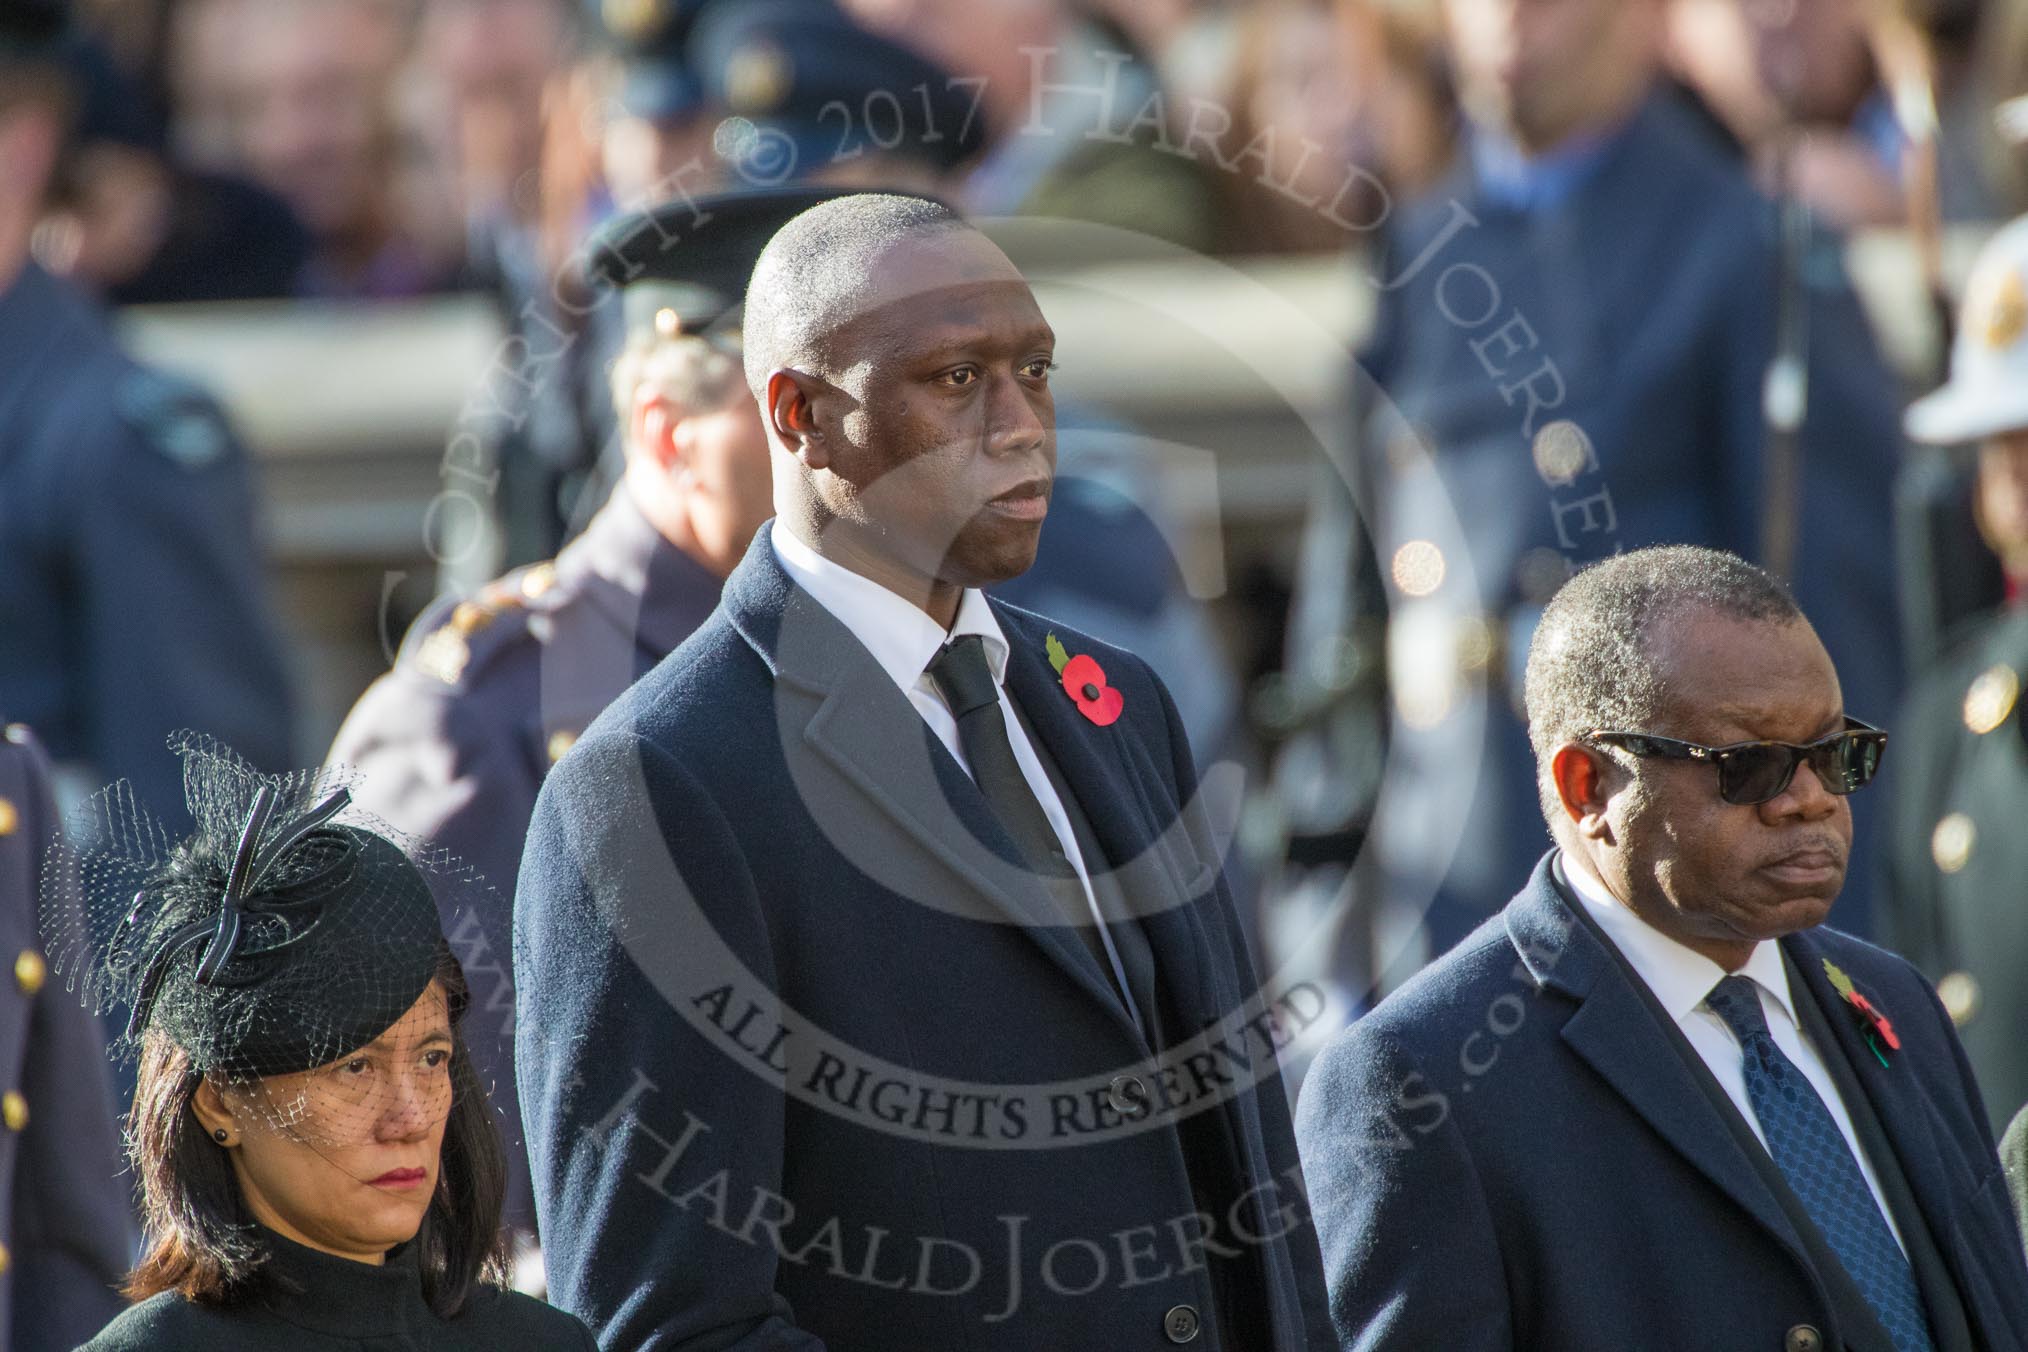 The High Commissioner of Singapore, Ms Foo Chi Hsia, the The Deputy Head of Mission of The Gambia, Mr. Kalifa Bojang, and the The High Commissioner of Zambia, H.E. Muyeba Shichapwa Chikonde, during Remembrance Sunday Cenotaph Ceremony 2018 at Horse Guards Parade, Westminster, London, 11 November 2018, 11:03.